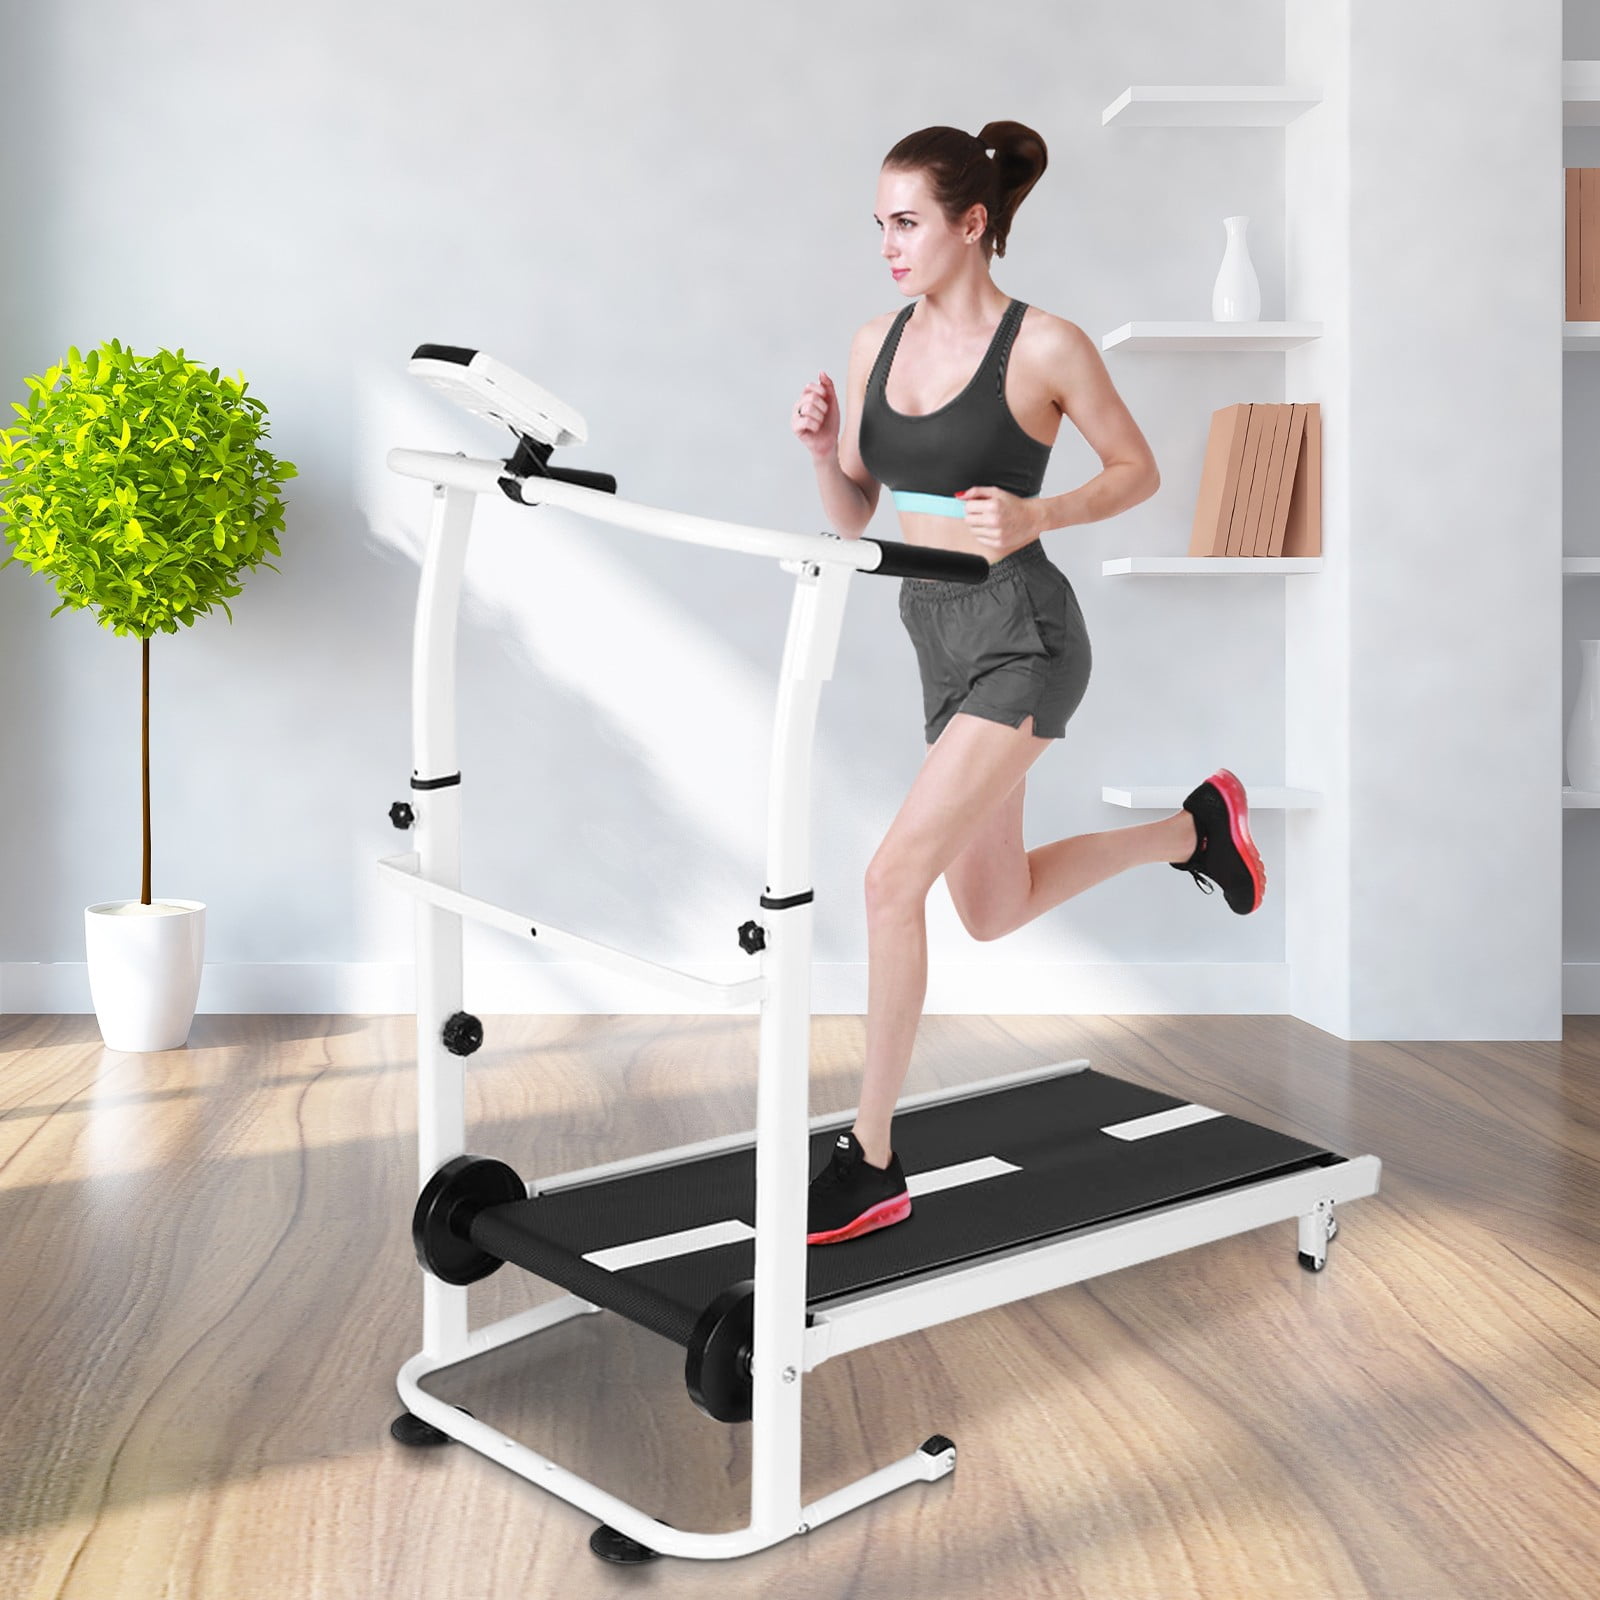 Folding Manual Treadmill Working Machine Cardio Fitness Exercise Incline Home 